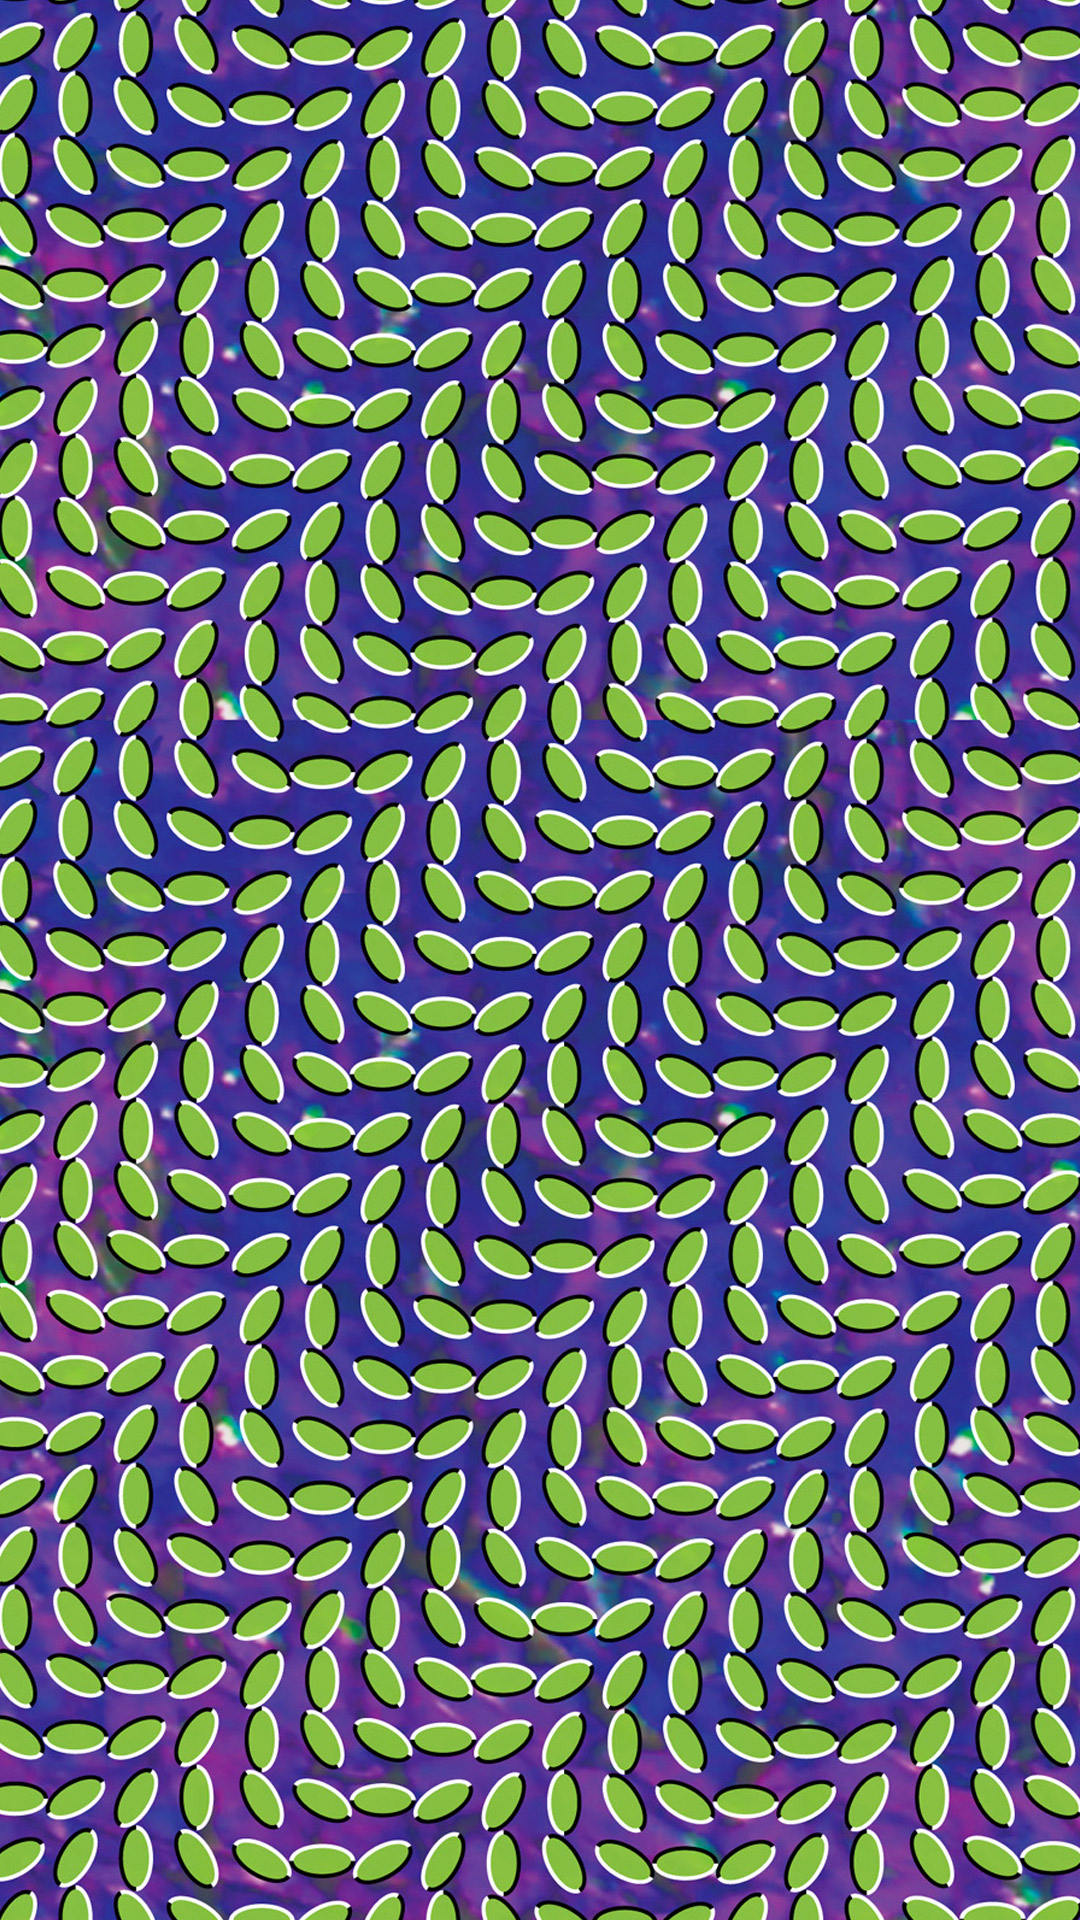 1080x1920 Trippy Optical Illusions That Appear to be Animated (Use as Phone Wallpaper if You Want to go Crazy) &acirc;&#128;&#147; BOOOOOOOM! &acirc;&#128;&#147; CREATE * INSPIRE * COMMUNITY * ART * DESIGN * MUSIC * FILM * PHOTO * PROJECTS